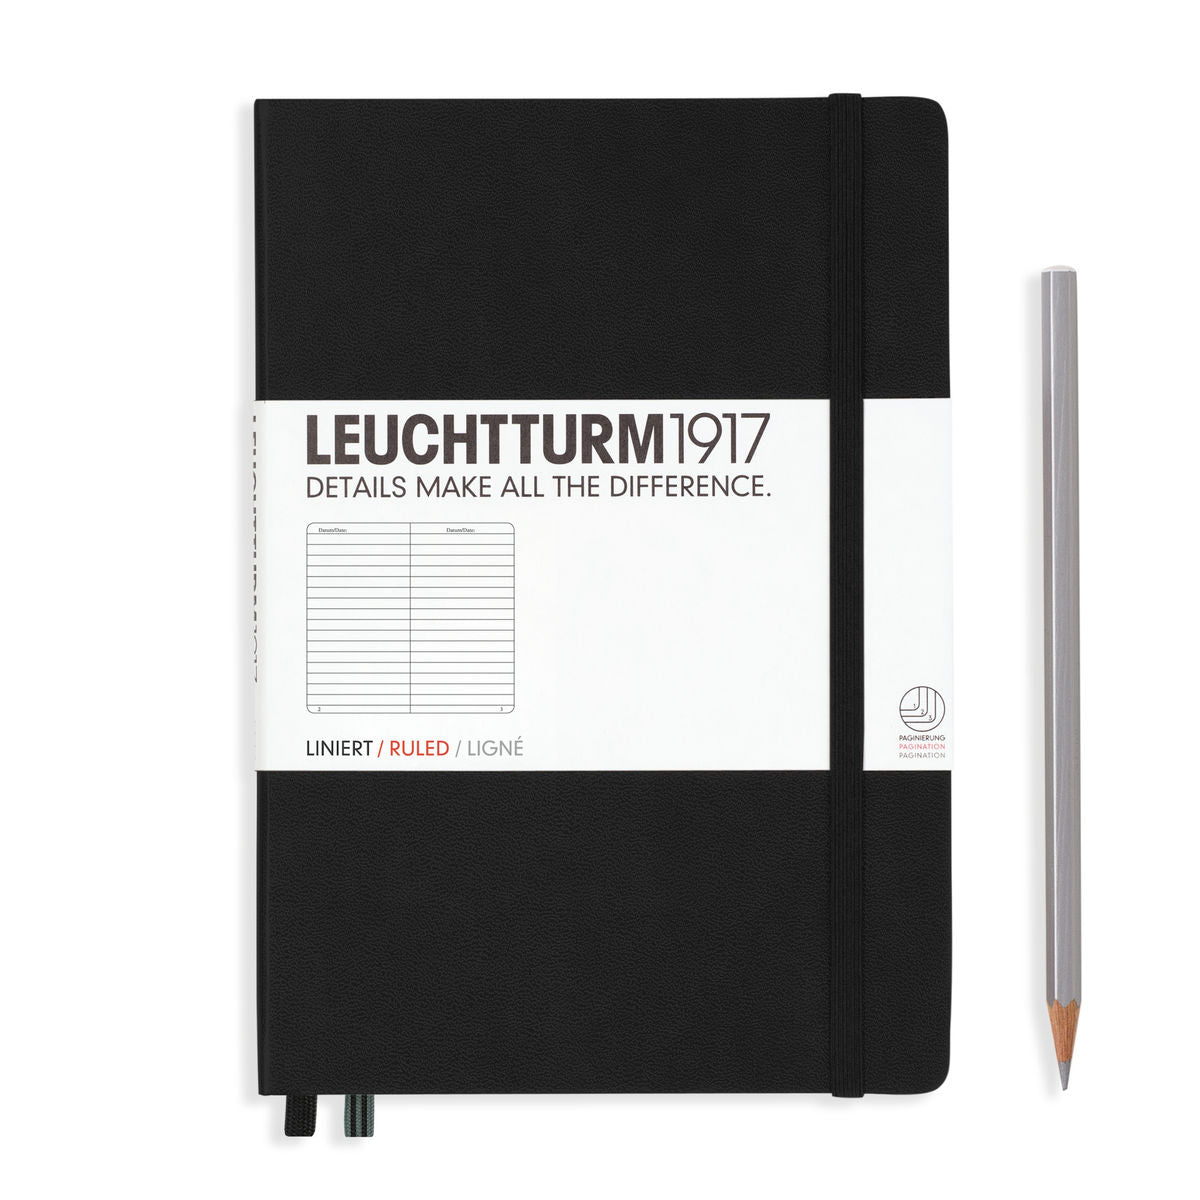 Notebook Medium (A5) Hardcover, 249 Numbered Pages, Ruled, Black